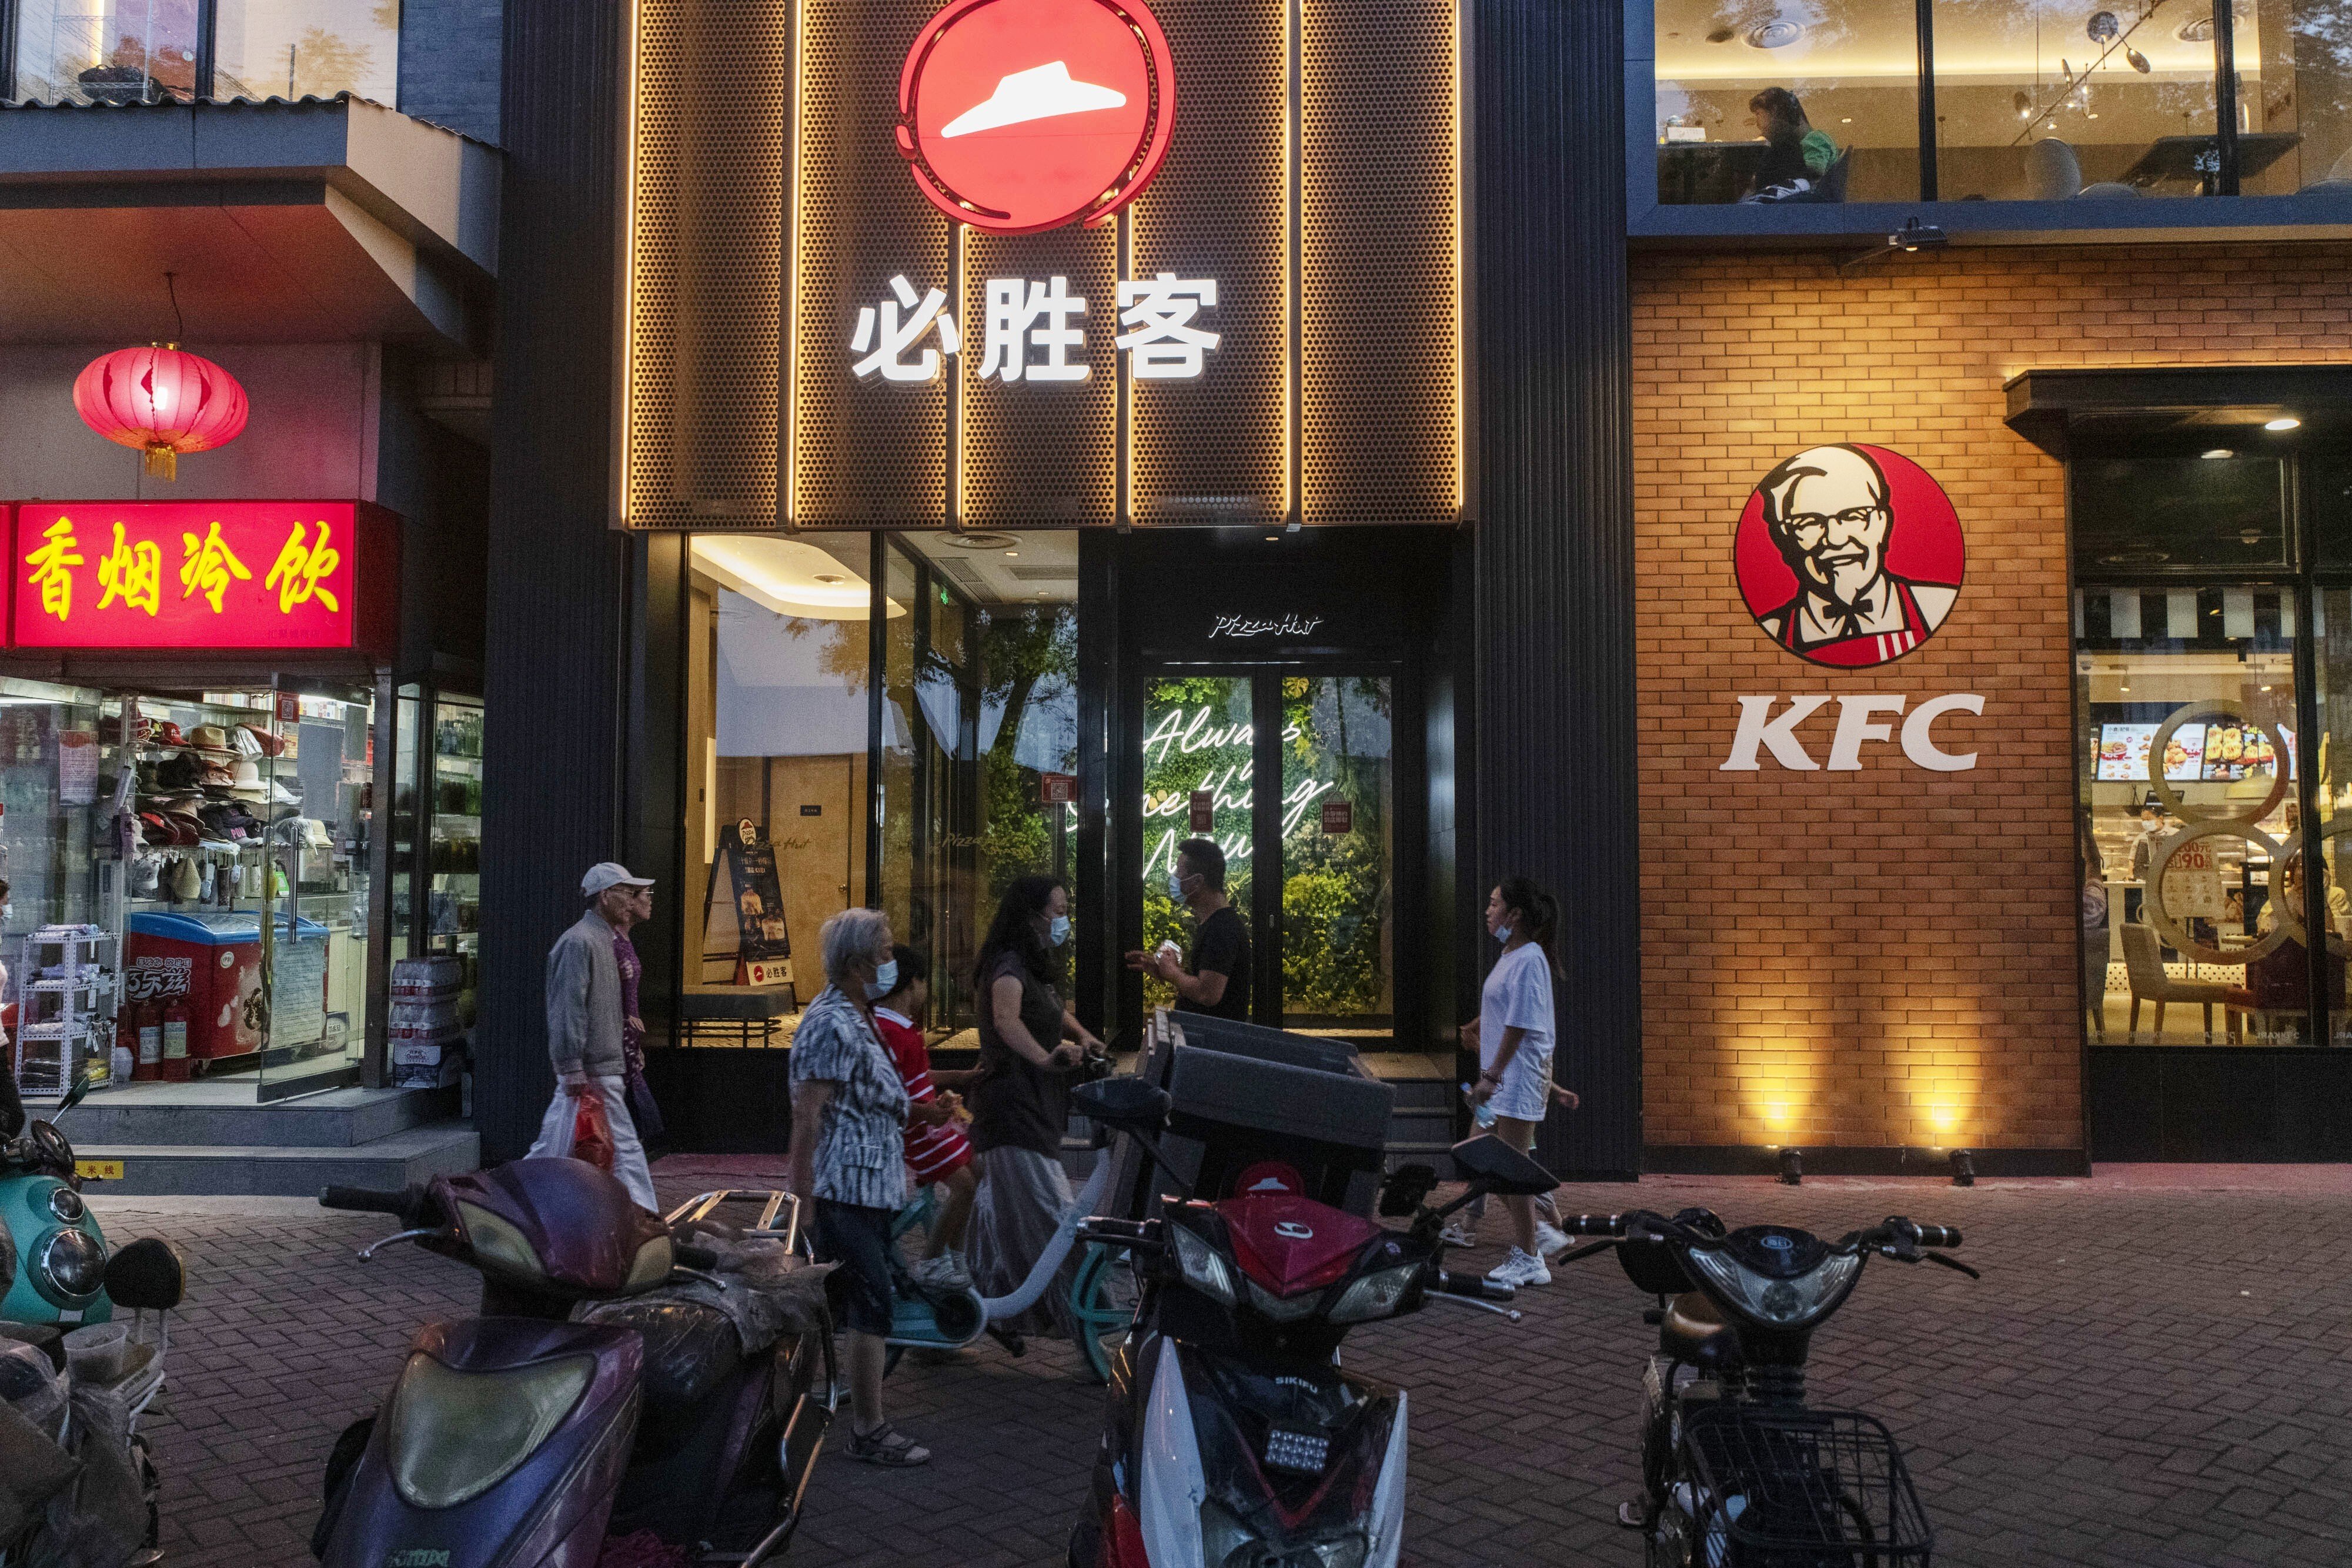 Pedestrians walk past a Pizza Hut restaurant and a KFC restaurant, both operated by Yum China Holdings in Beijing on Saturday, Sept. 5, 2020. Photo: Bloomberg